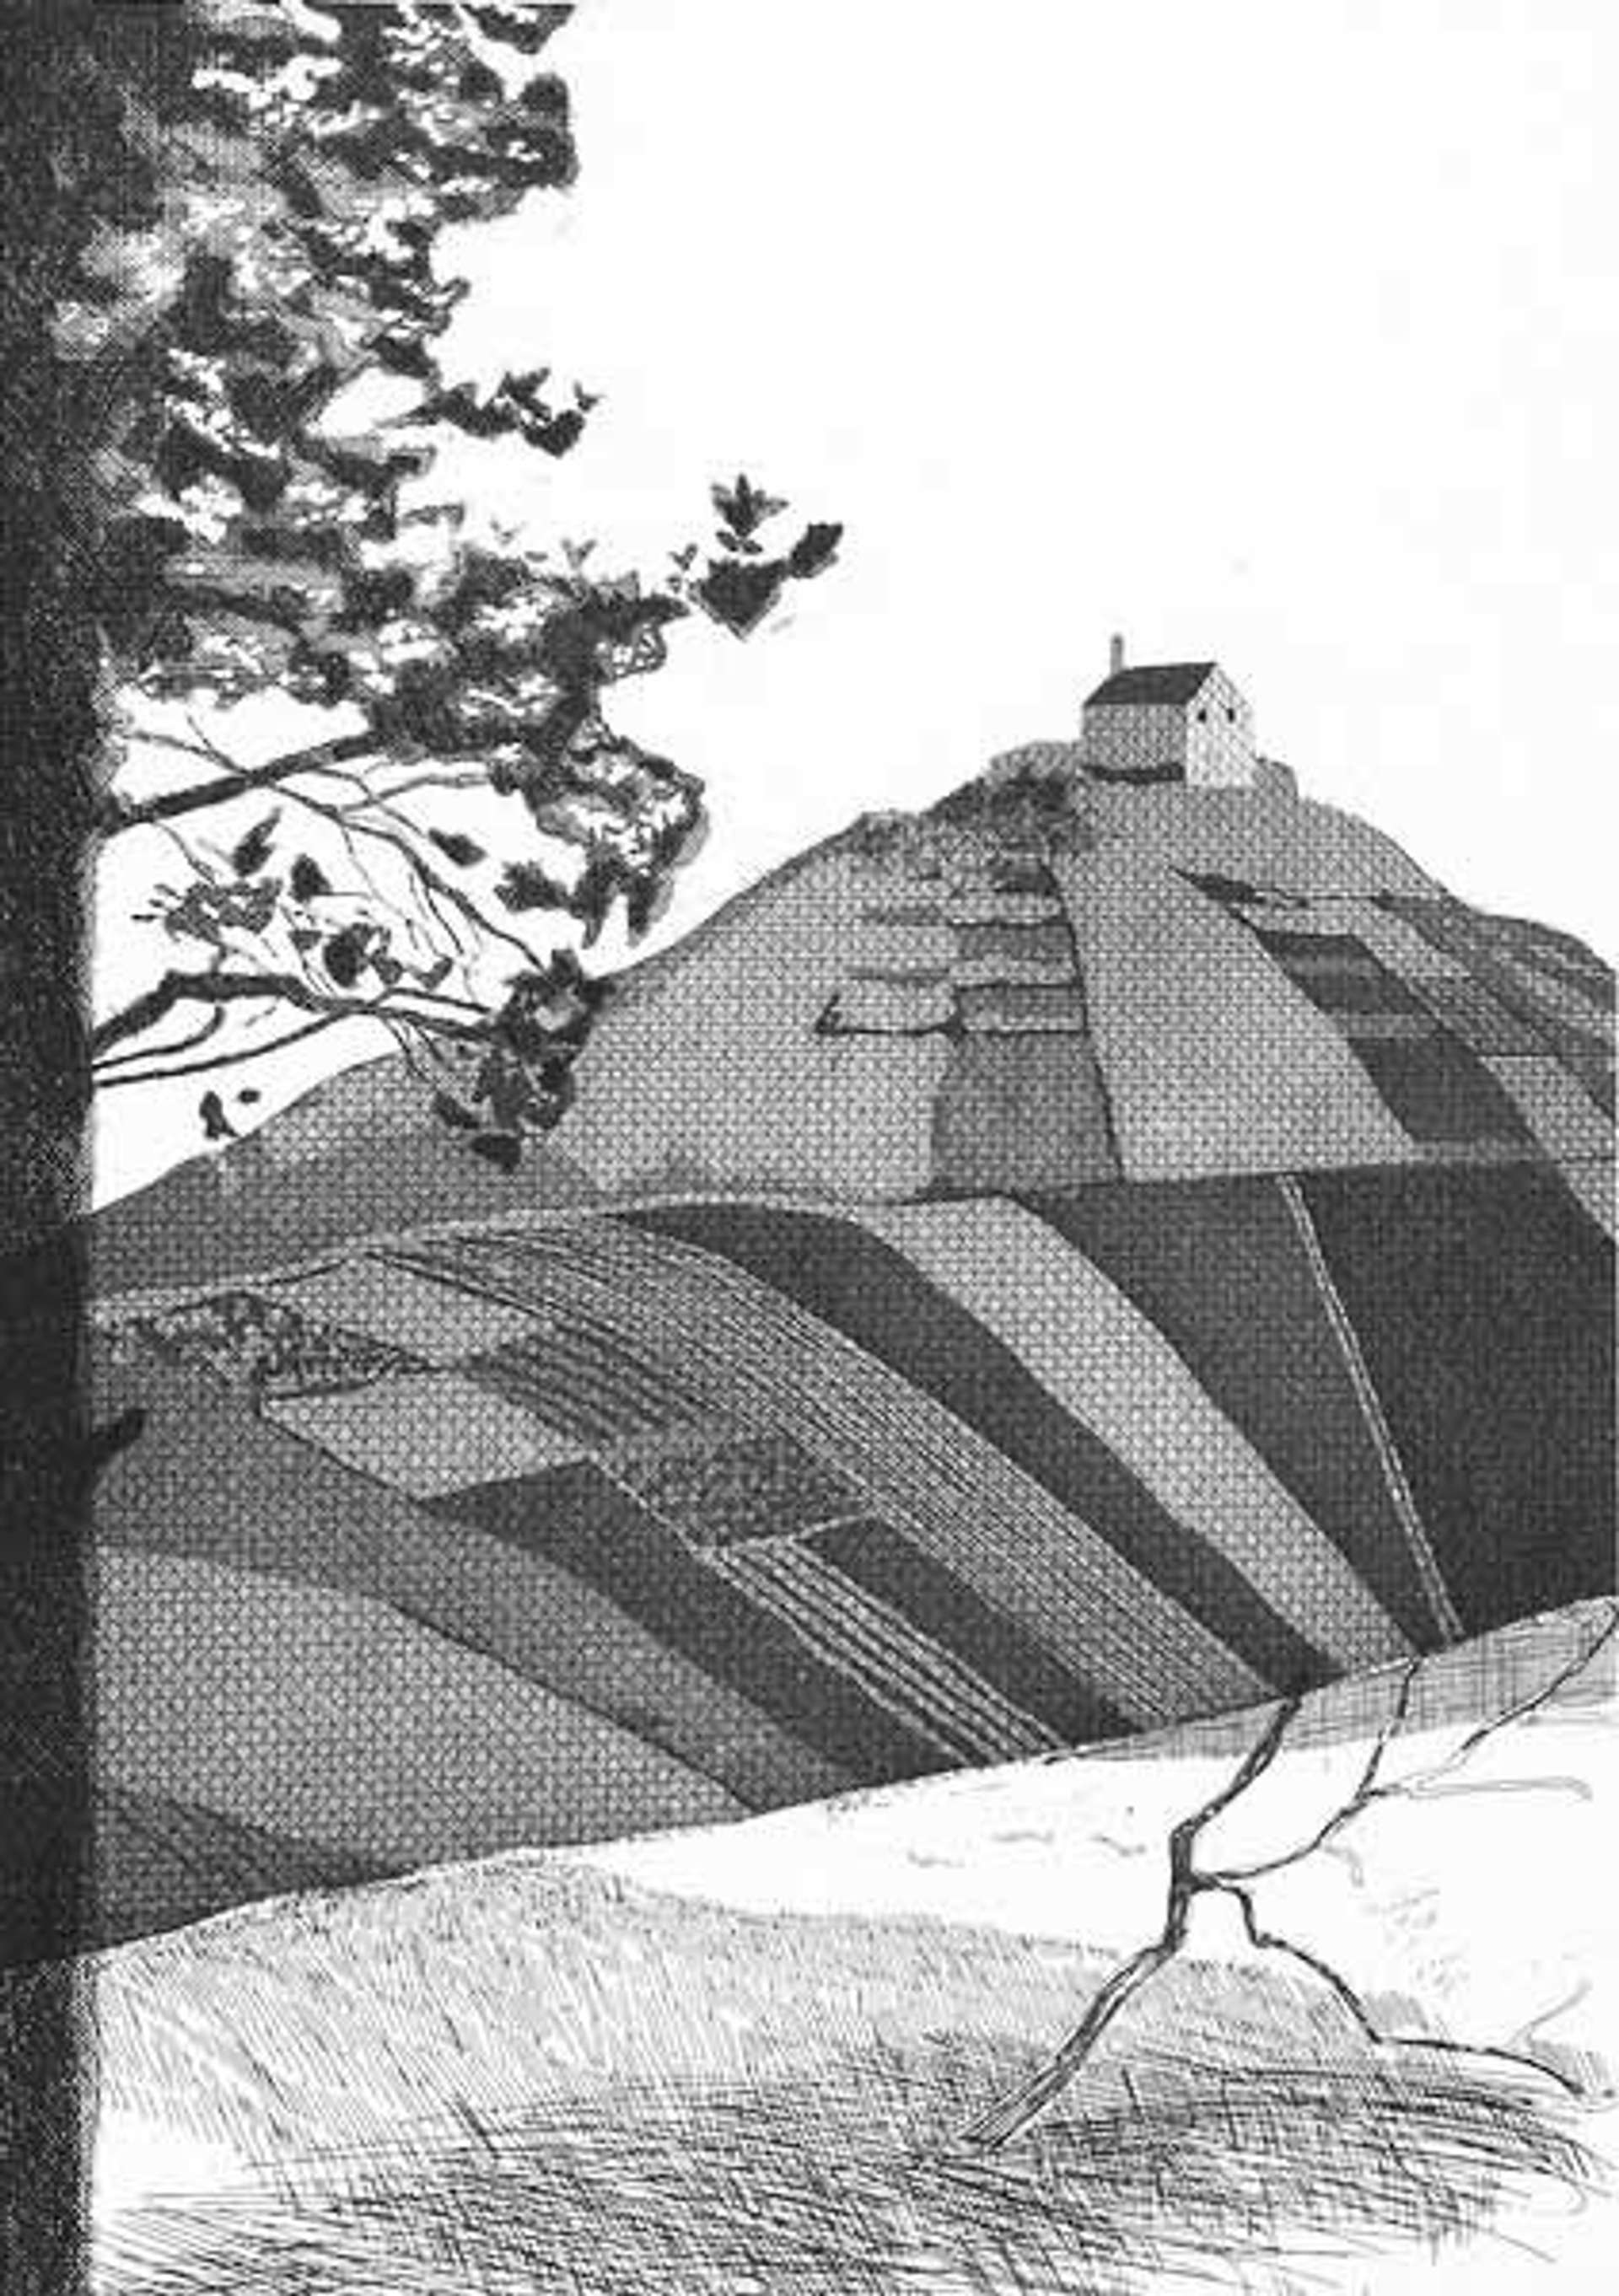 An intaglio print by David Hockney in monochrome showing a house on top of a hill.